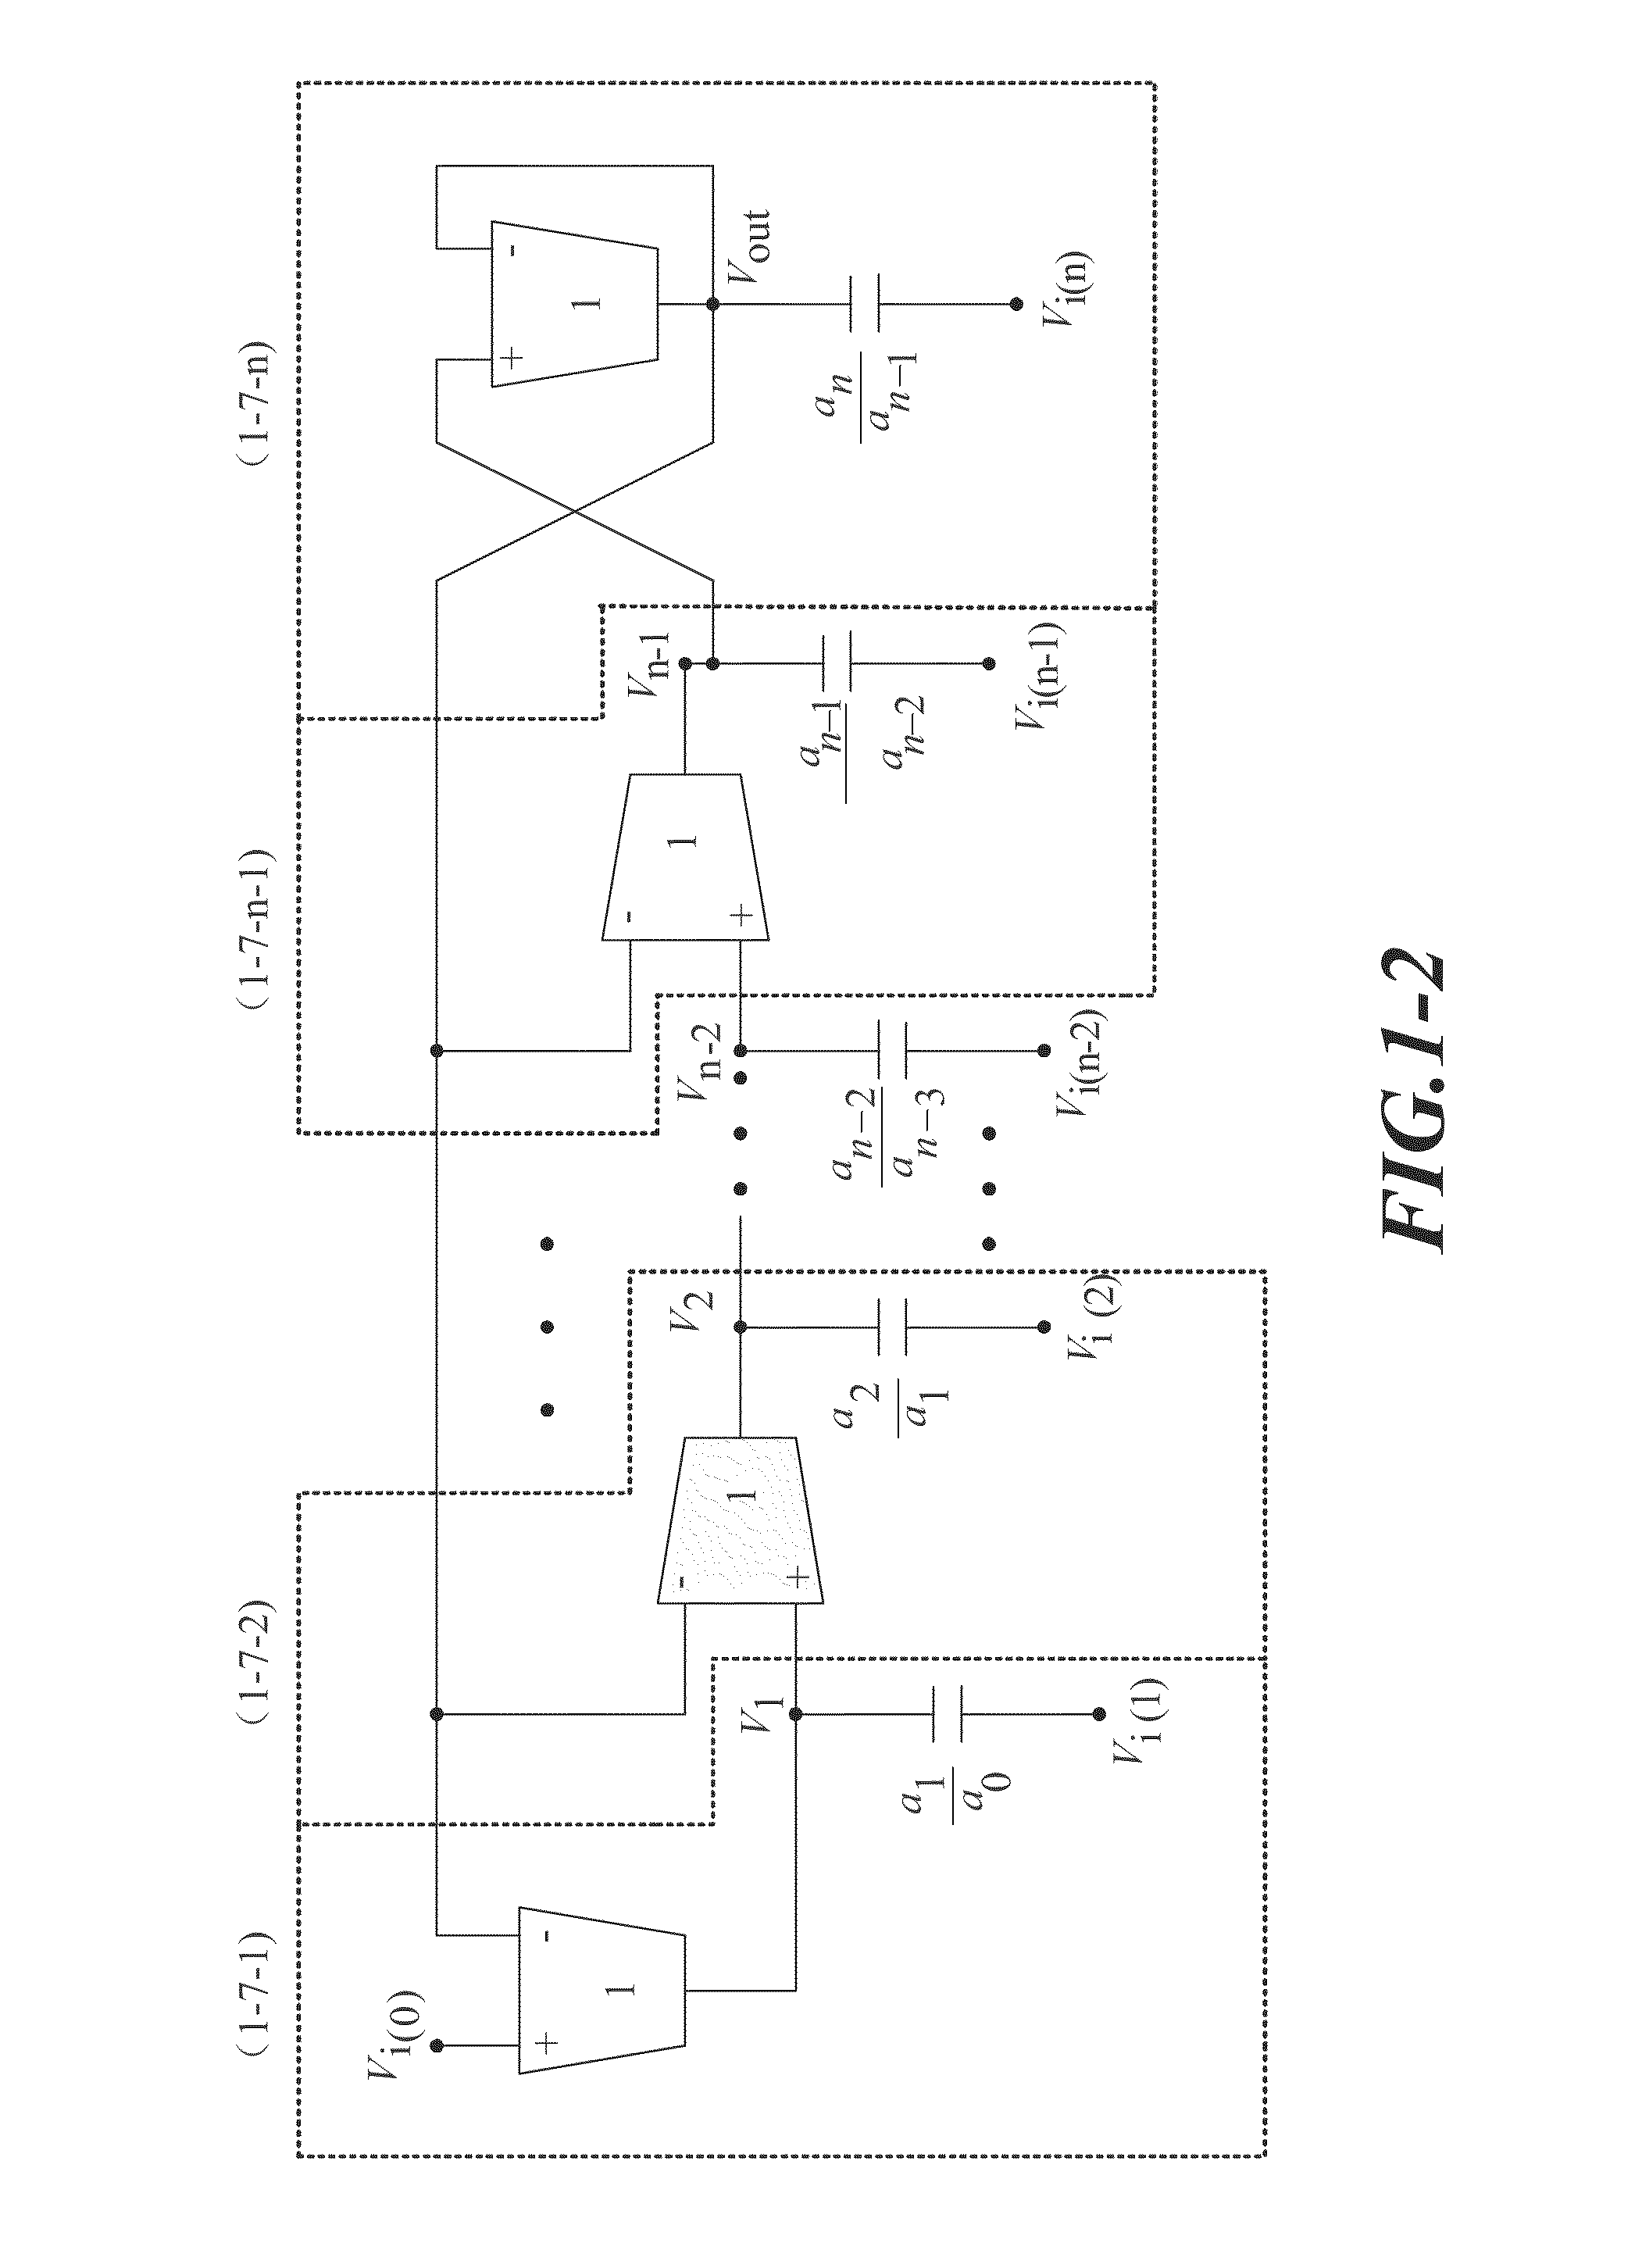 Analytical synthesis method and ota-based circuit structure